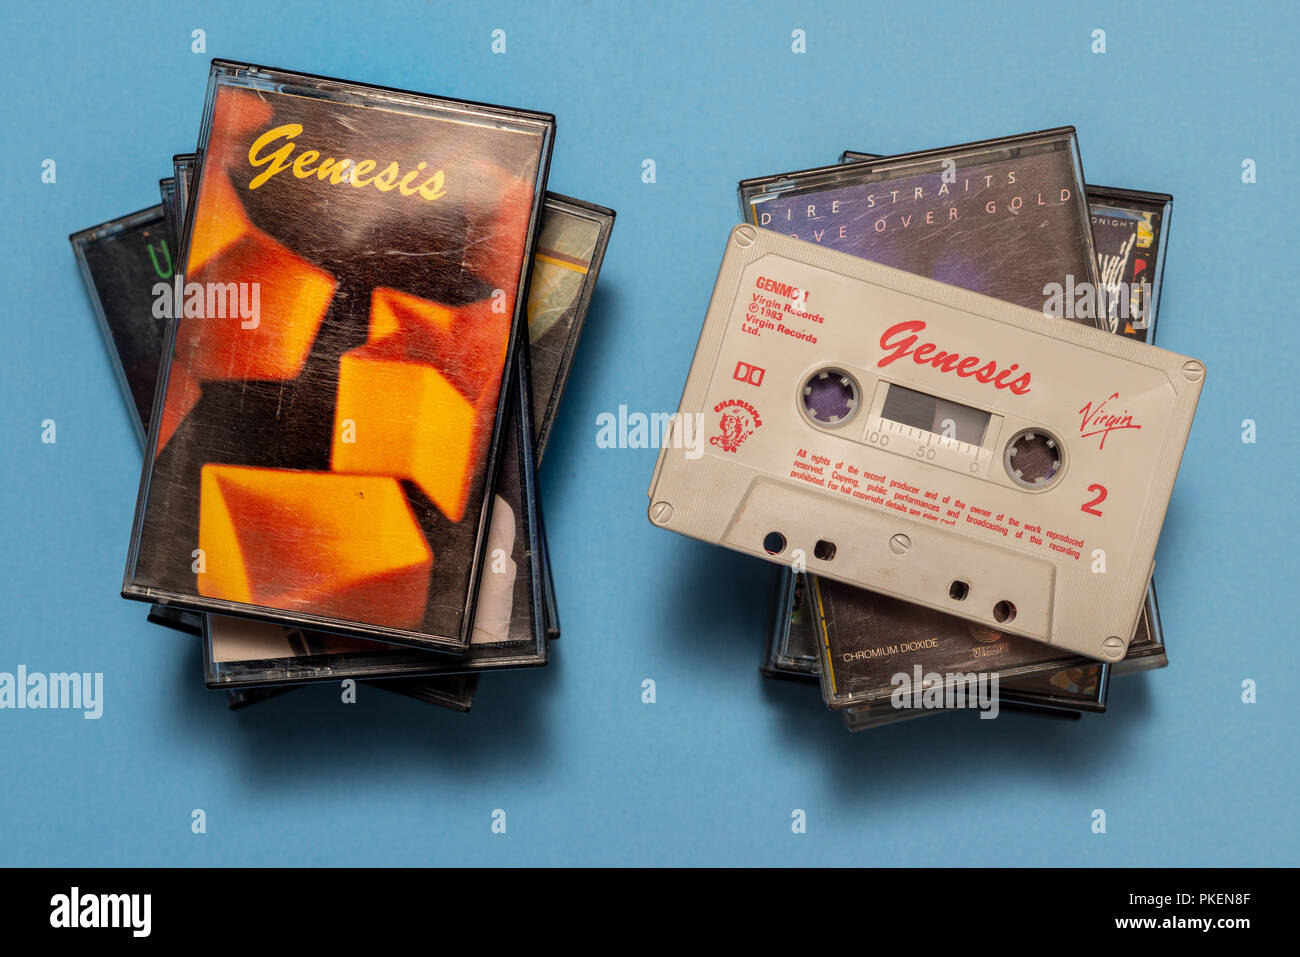 compact audio cassette of Genisis album with art work. Stock Photo